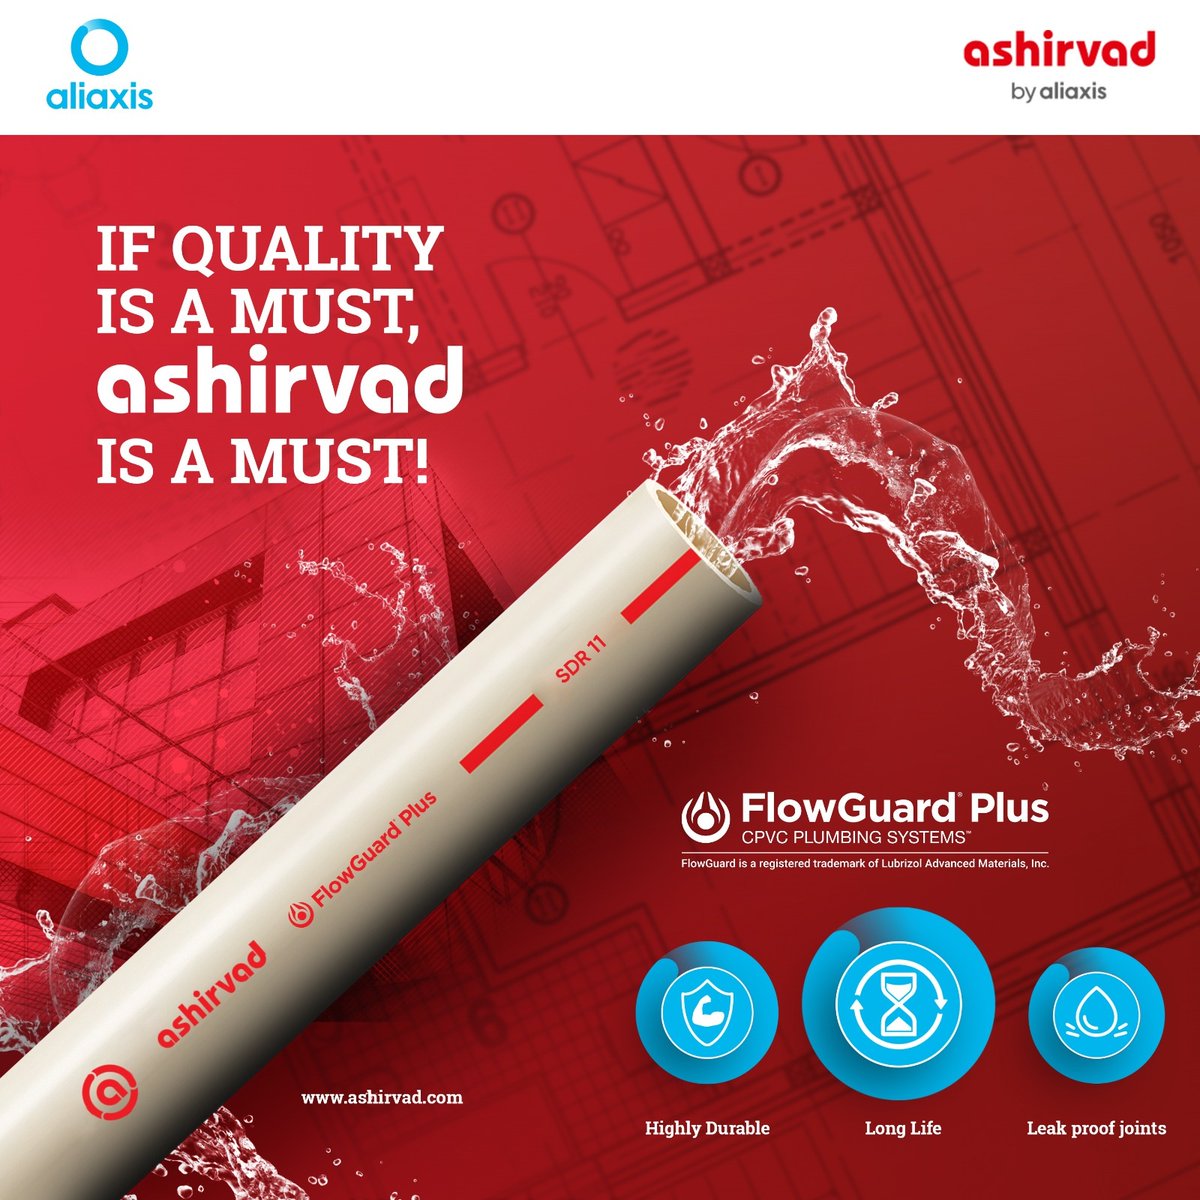 When it comes to quality plumbing, there's only one name you can trust: Ashirvad. Our FlowGuard Plus CPVC Plumbing Systems are built to last, offering unparalleled durability, a long lifespan, and leak-proof joints.